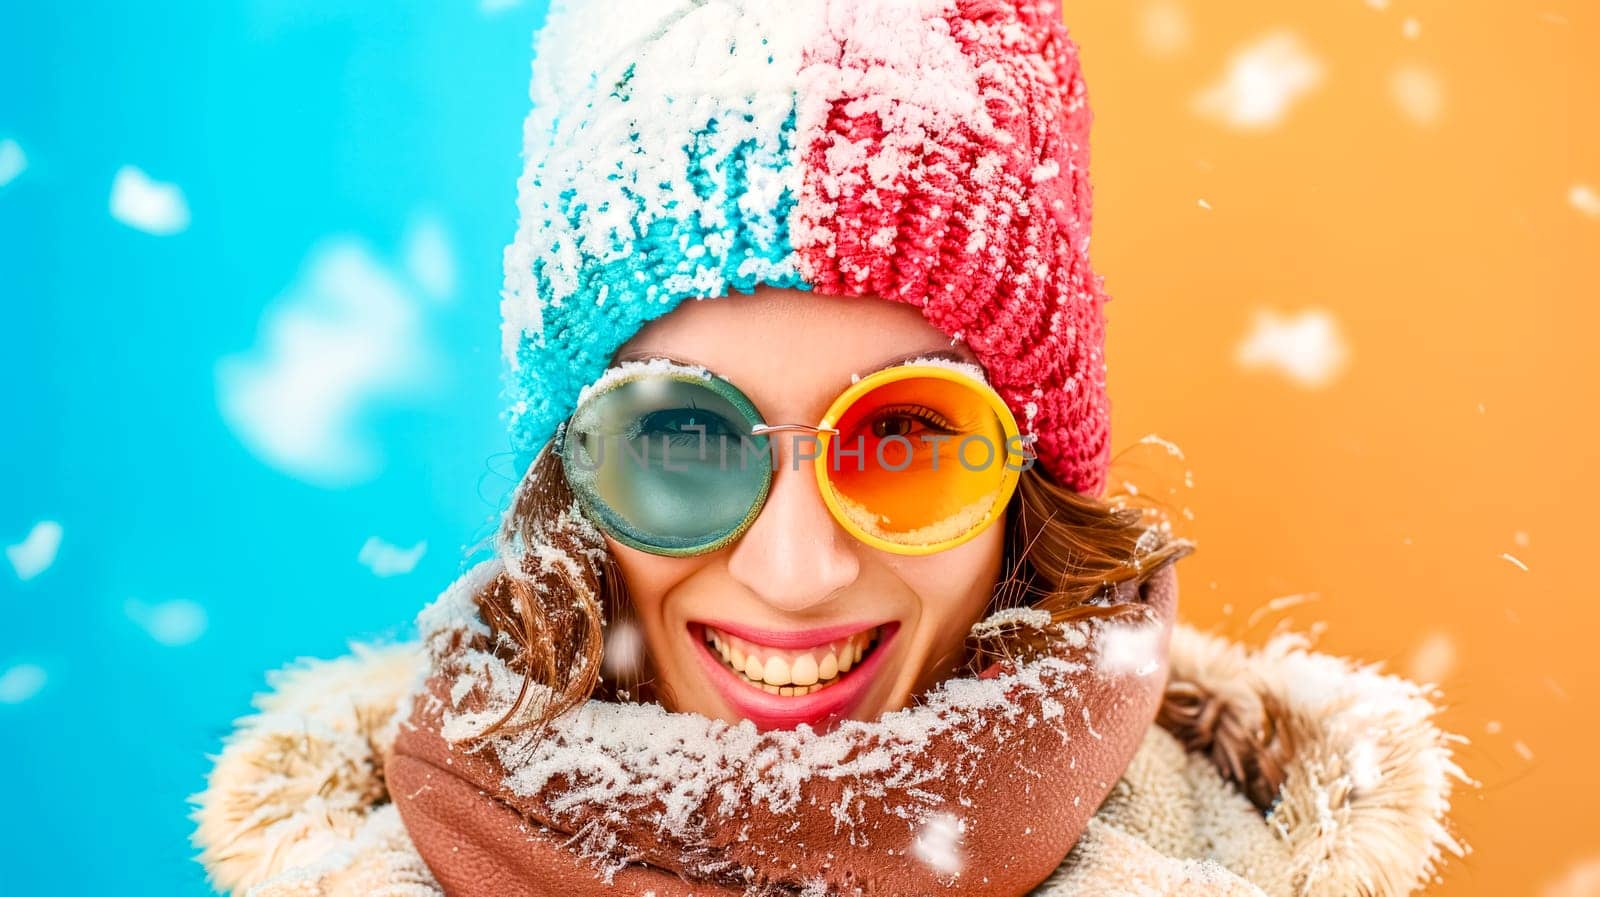 Portrait of a cheerful young lady wearing colorful winter accessories covered with snowflakes